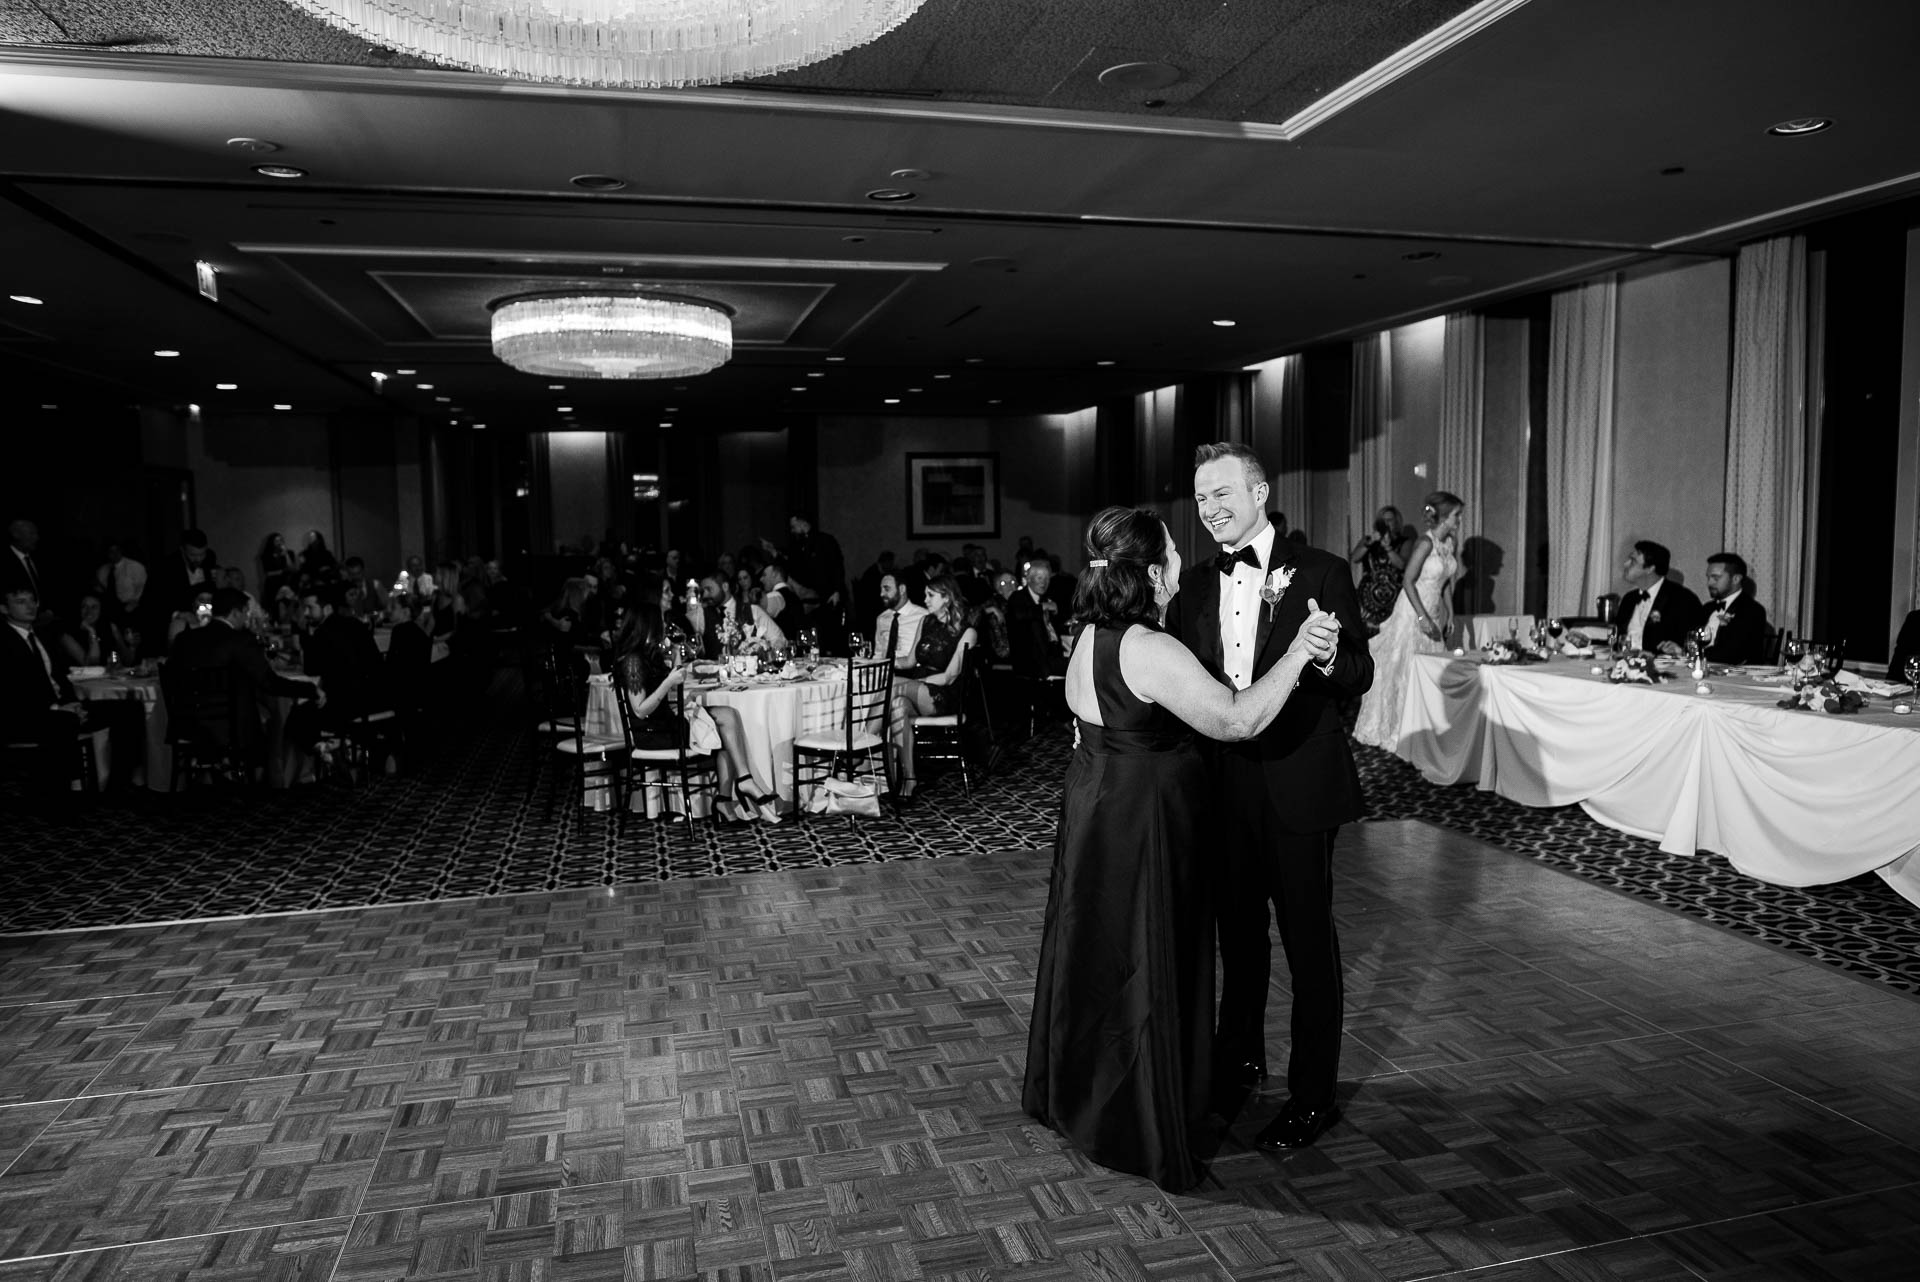 Mother and groom dance during their wedding reception at the Mid America Club in Chicago.